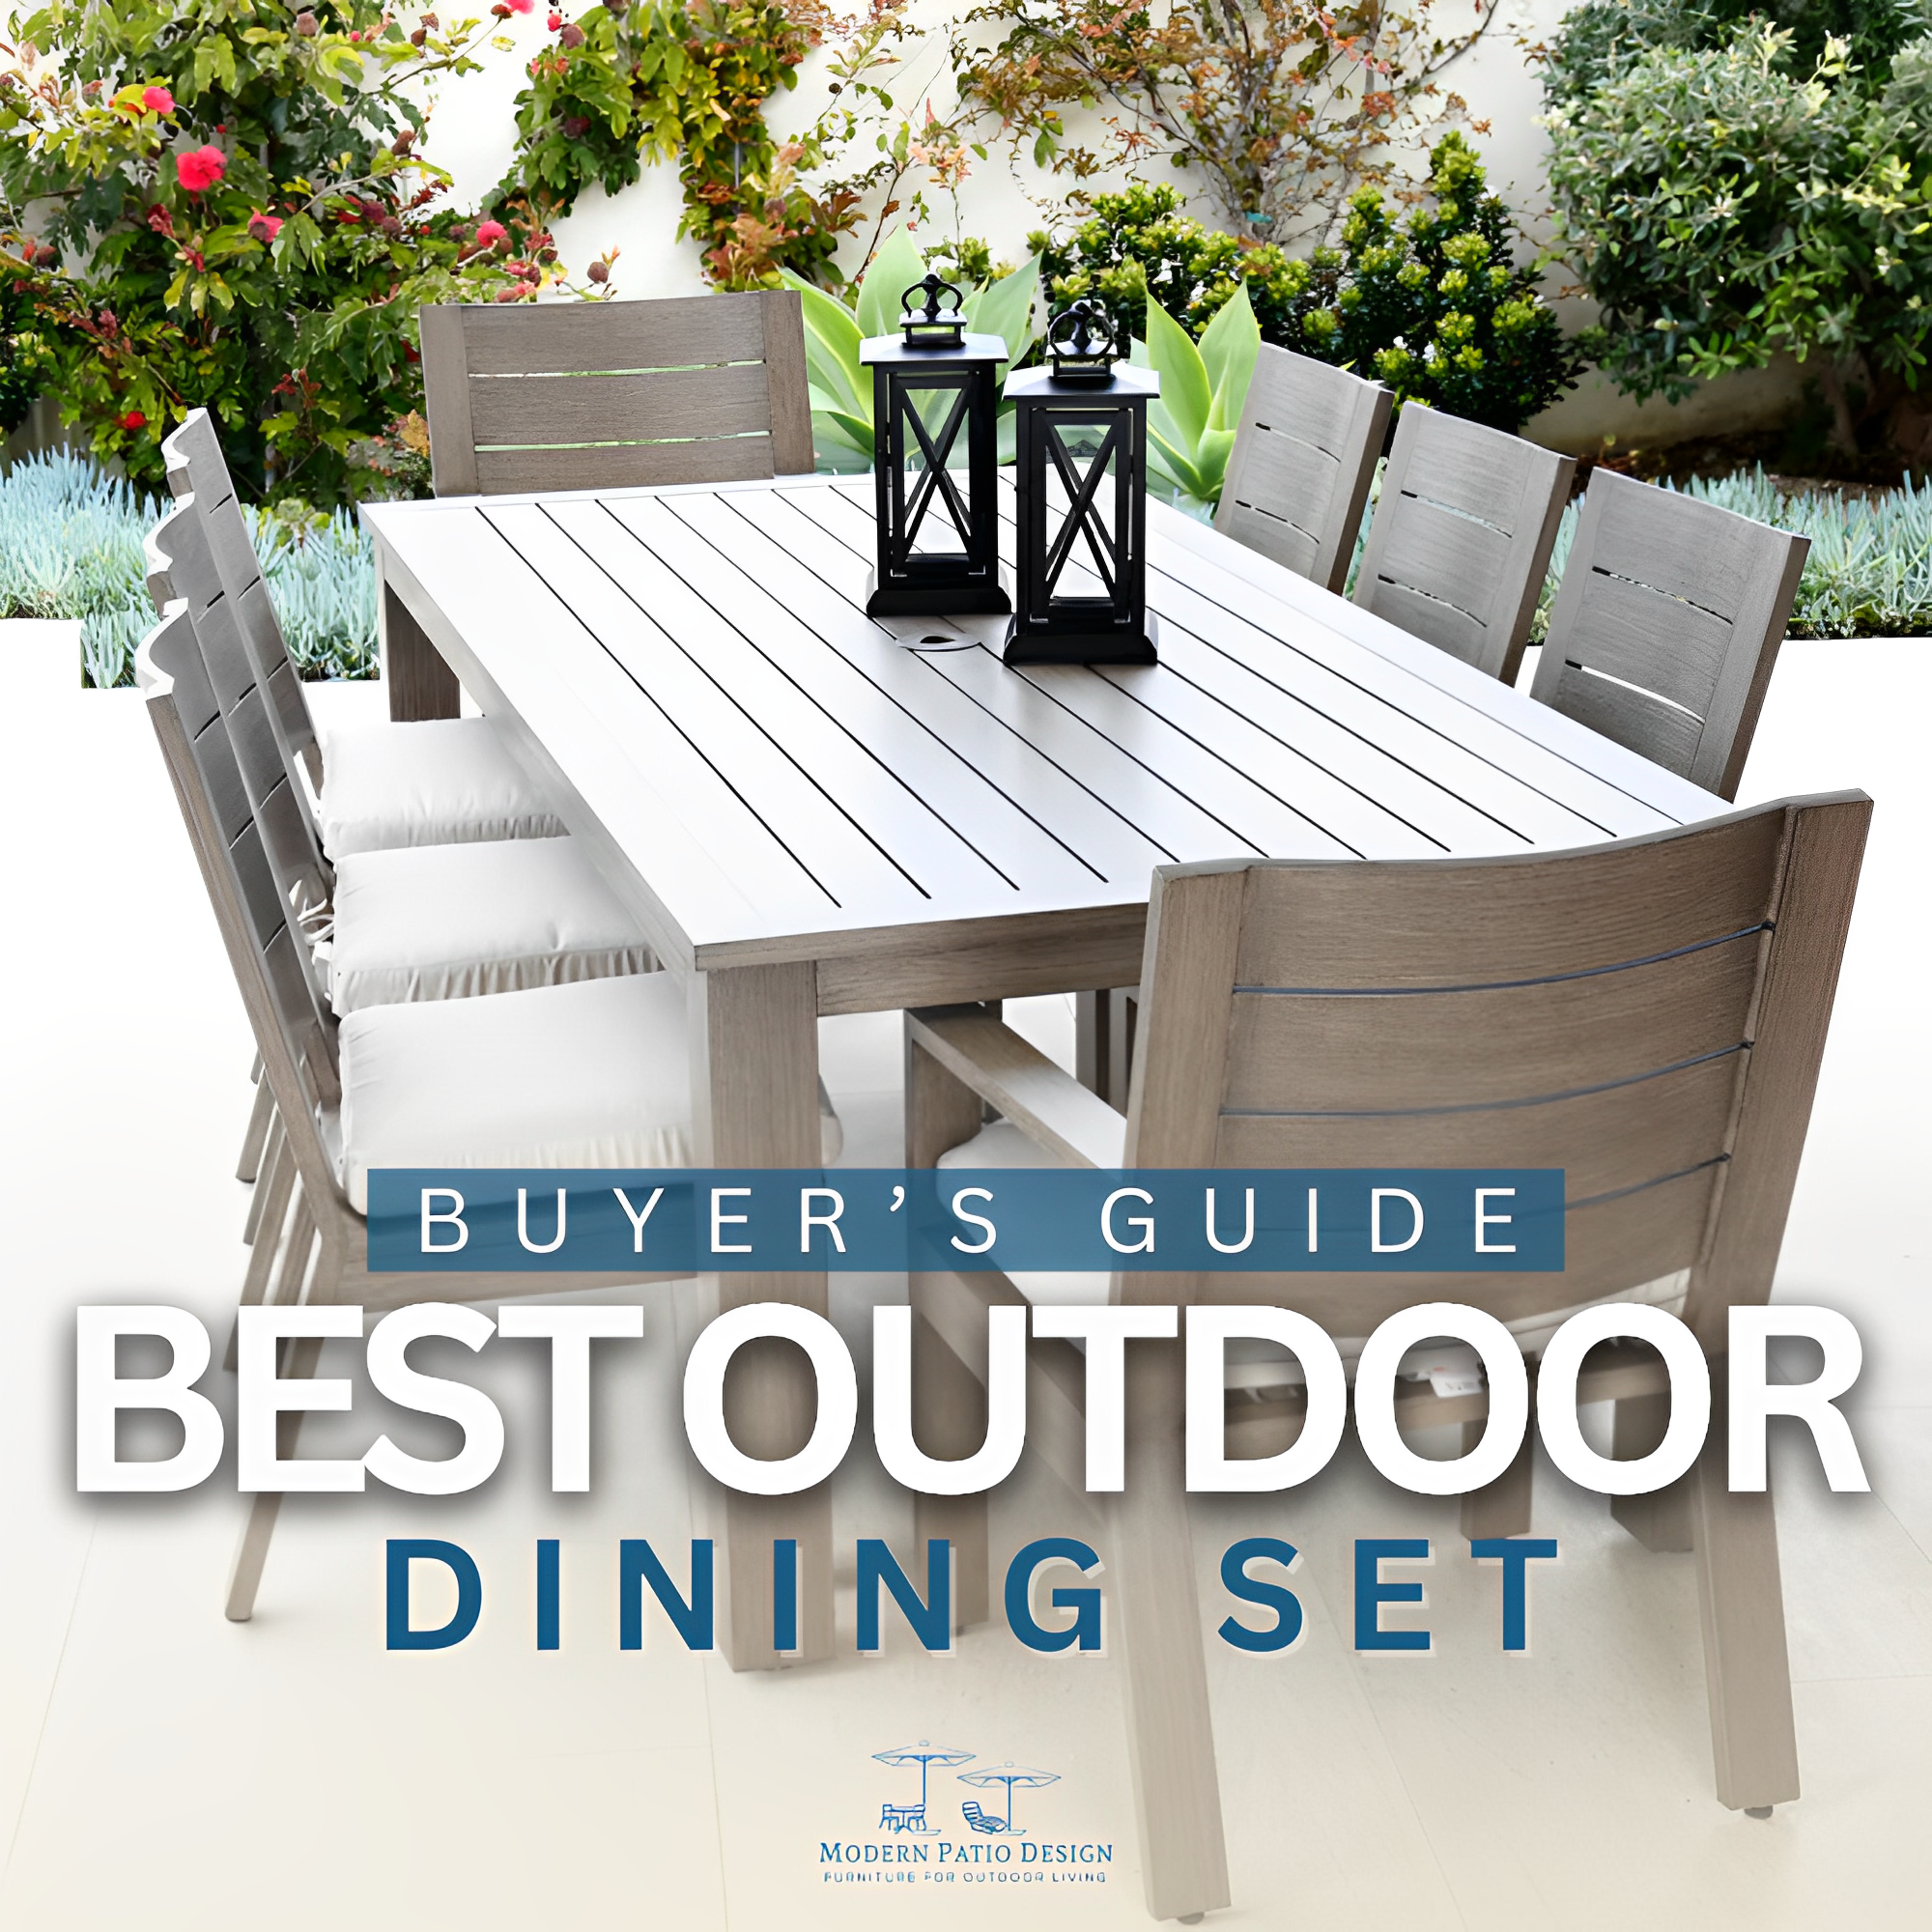 Dining Alfresco: A Buyer's Guide to the Best Outdoor Dining Set